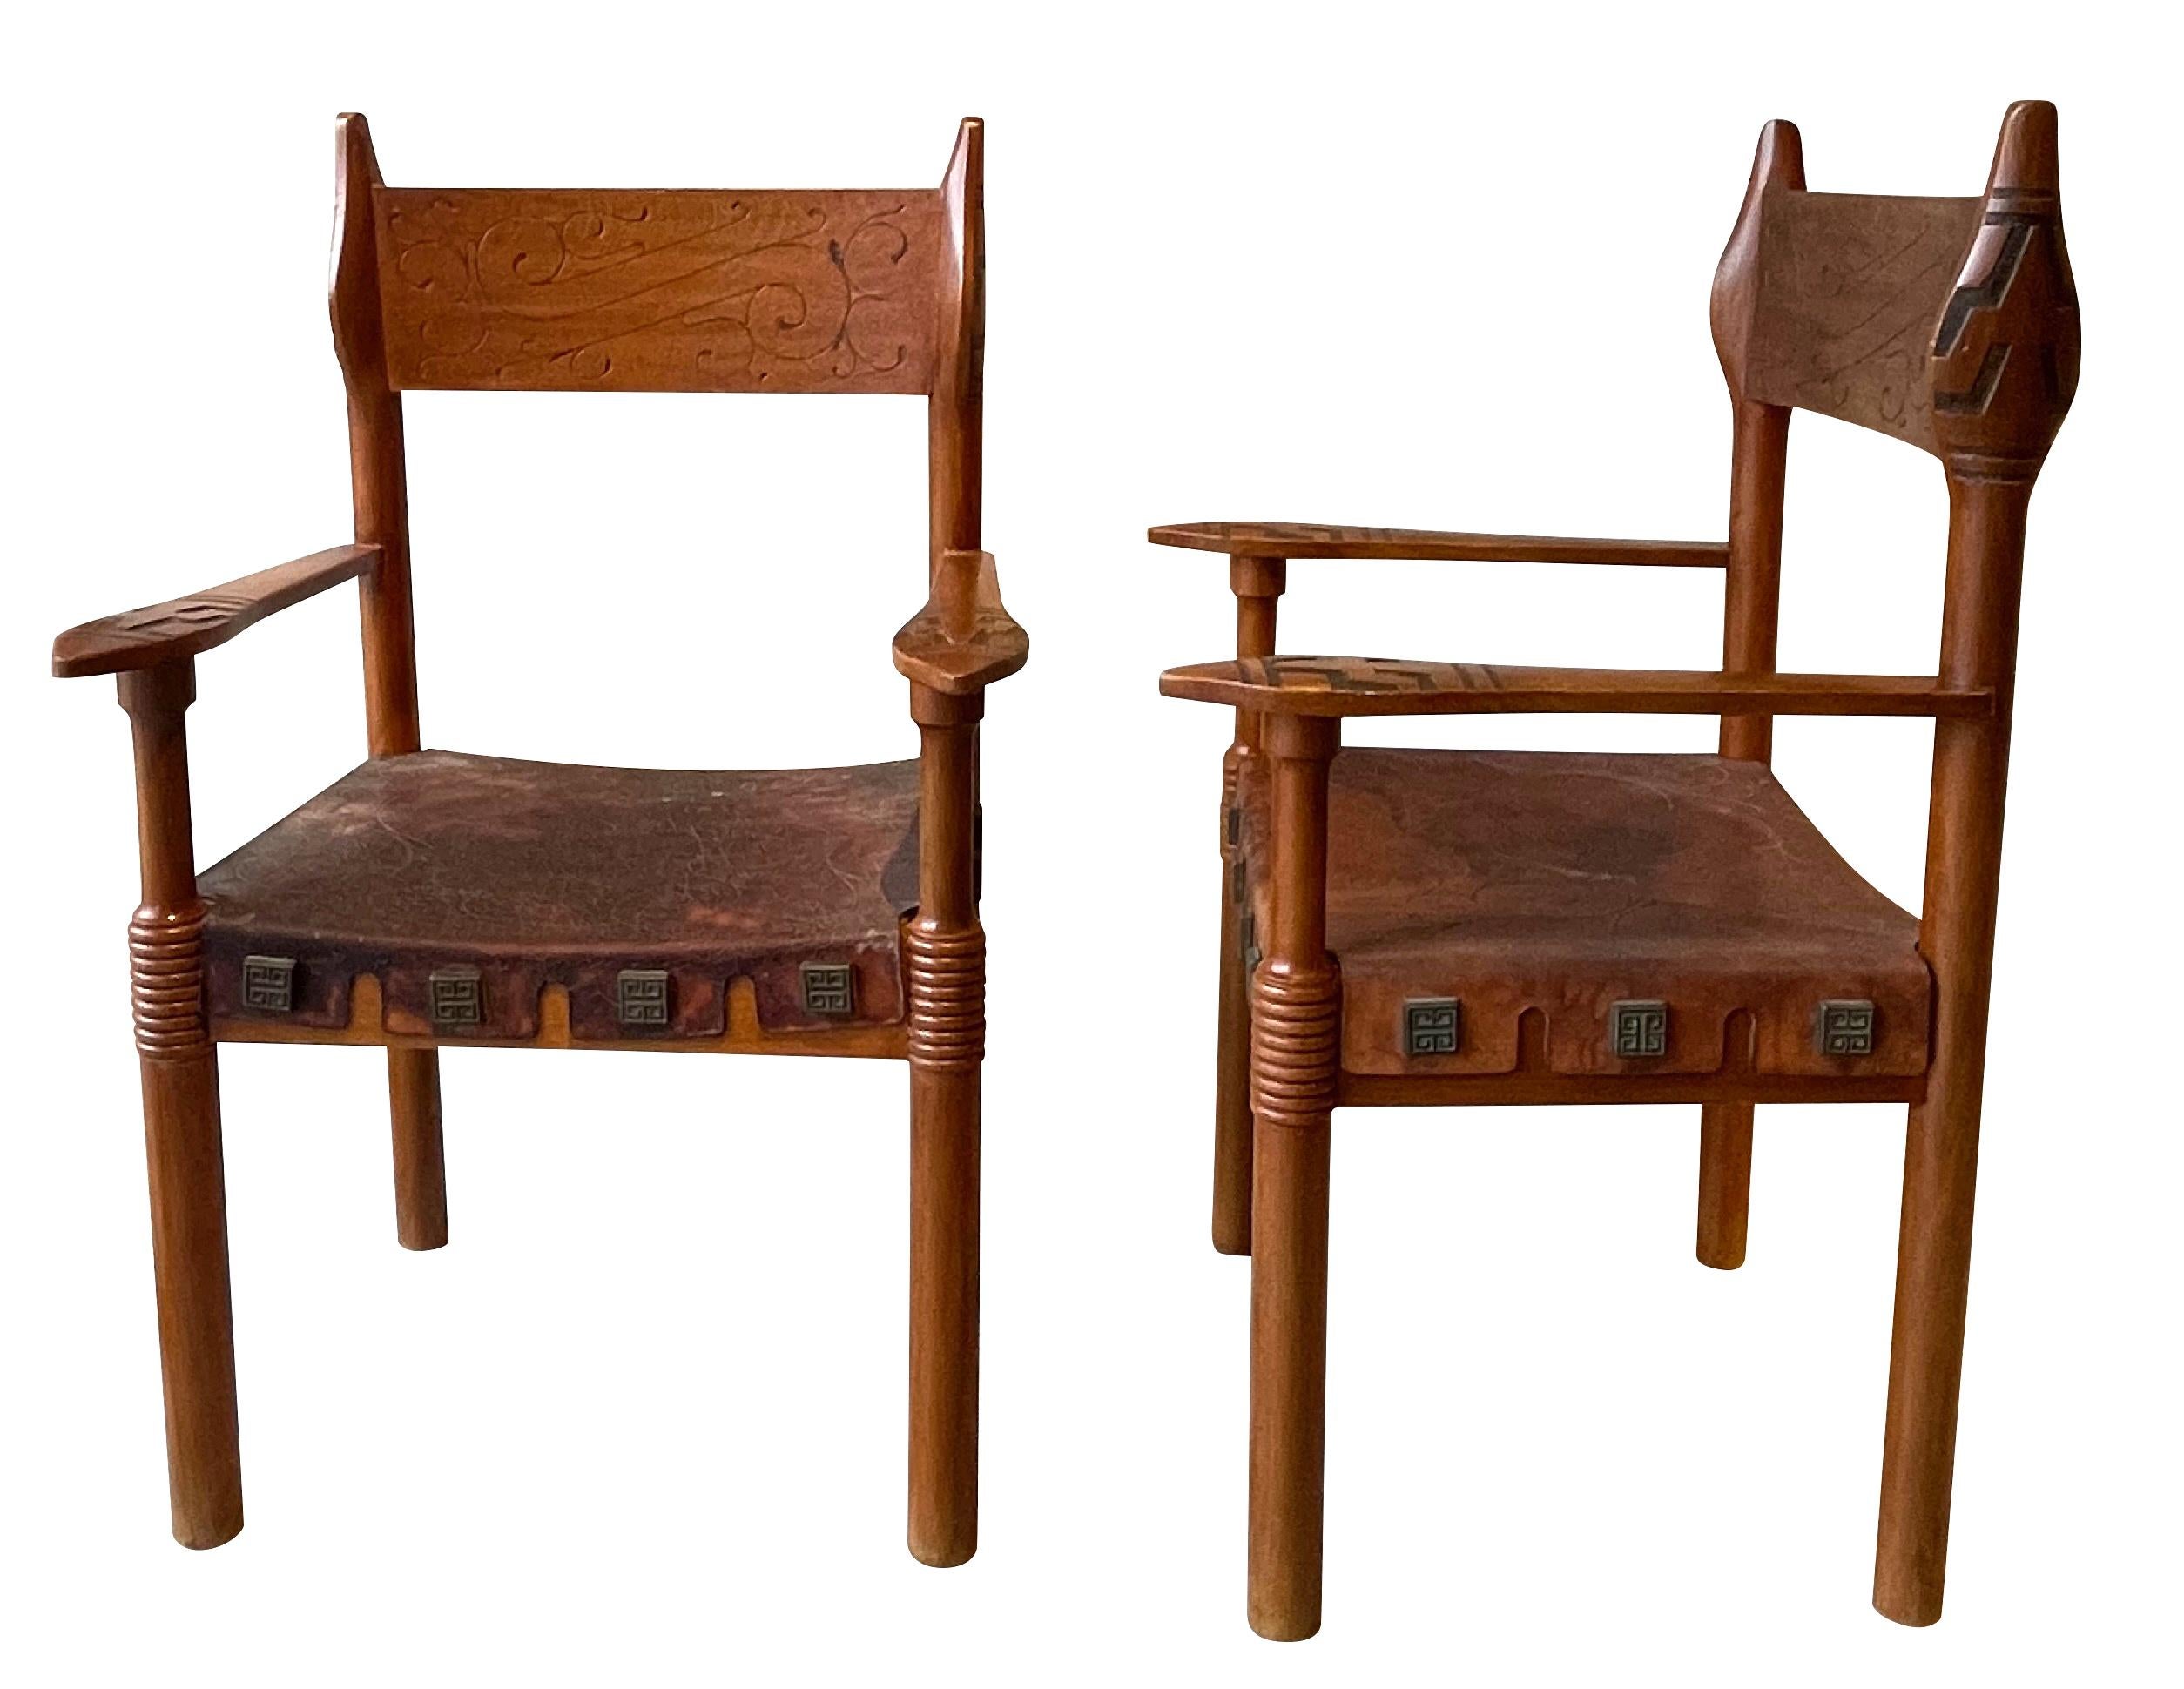 1970's Spanish pair wood frame, embossed leather seat chairs.
Unusual and very decorative carving on arms and sides of frame and back.
Embossed leather seats.
Engraved bronze rivets attaching leather to frame of chairs.
